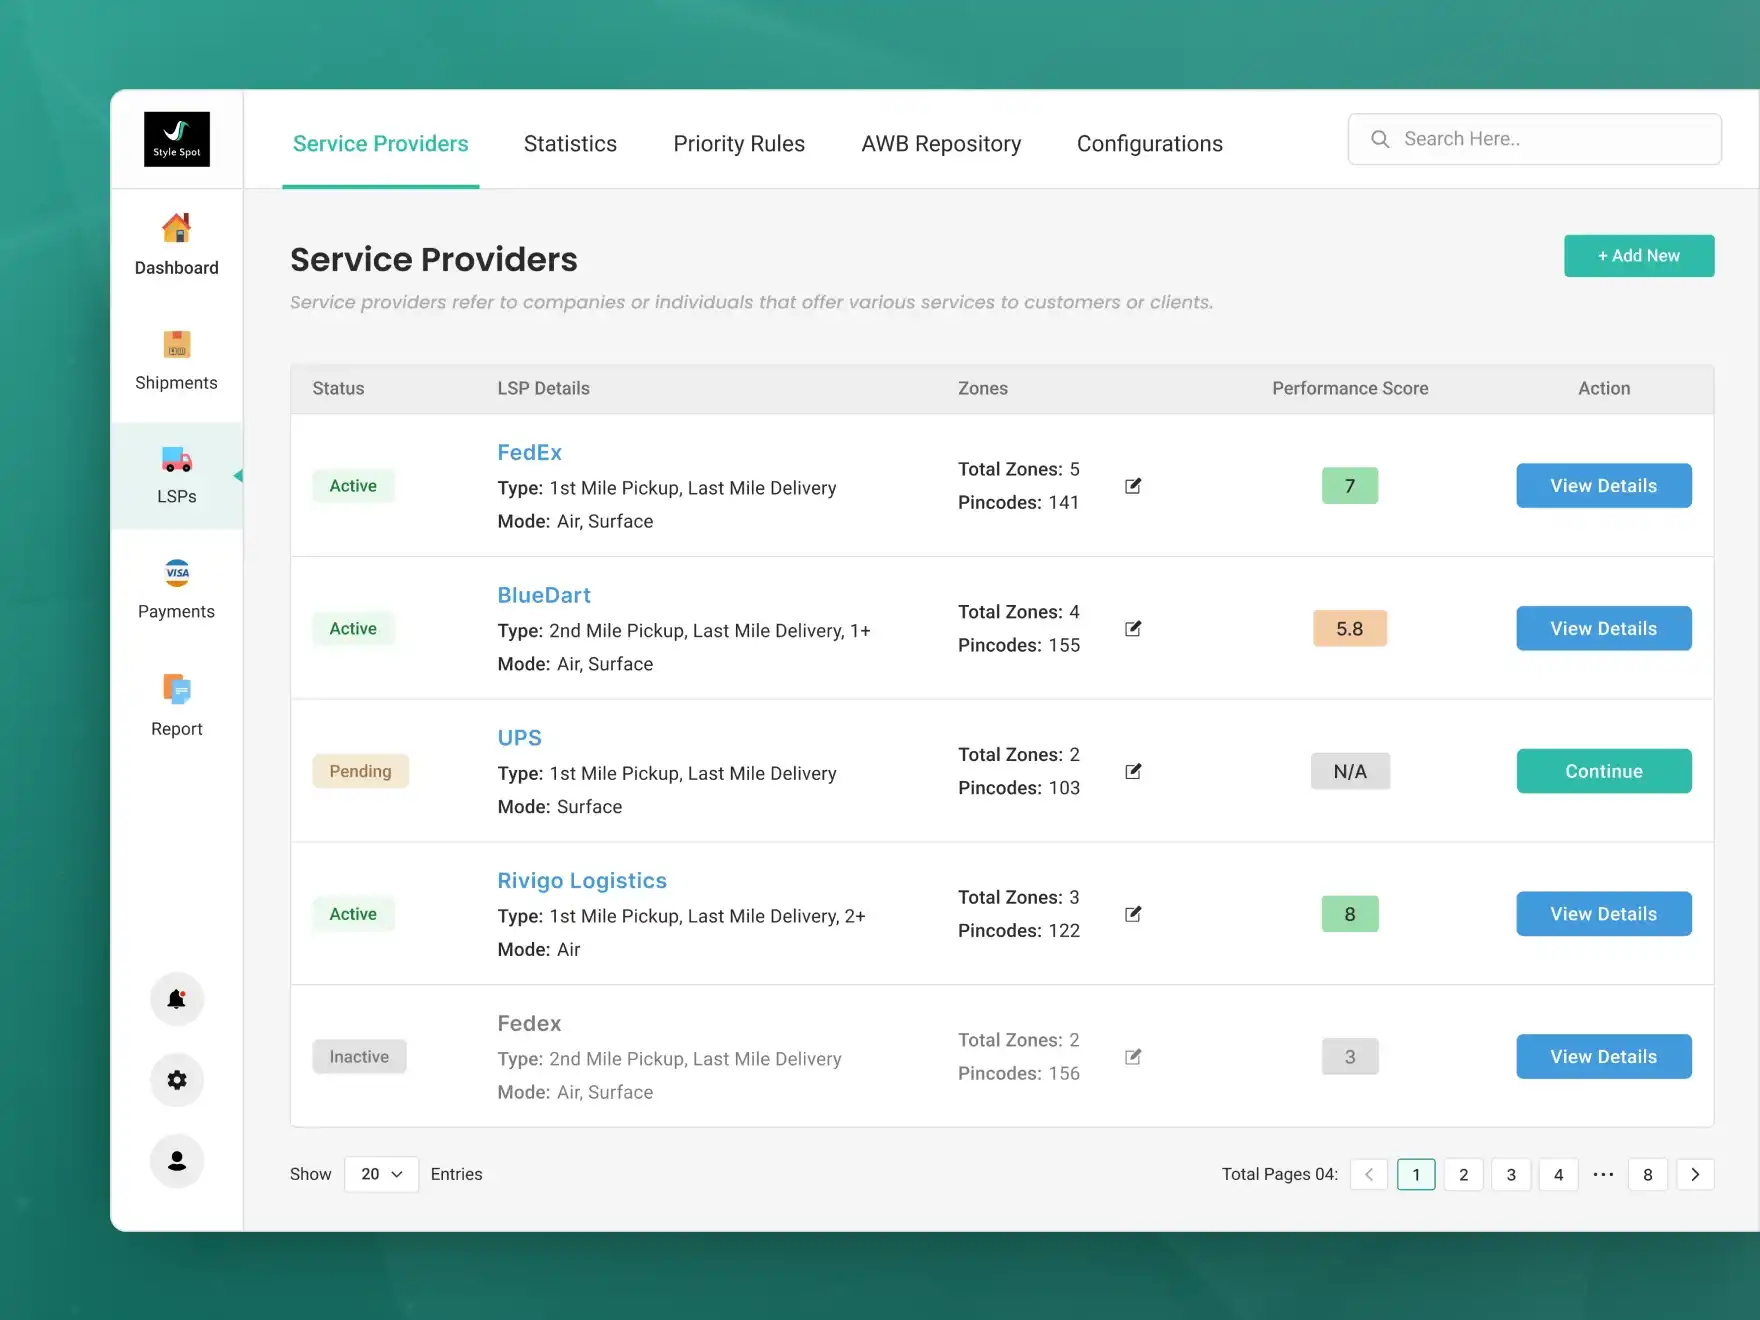 UI Screen of Service Provider Details, thier status, performance, etc.